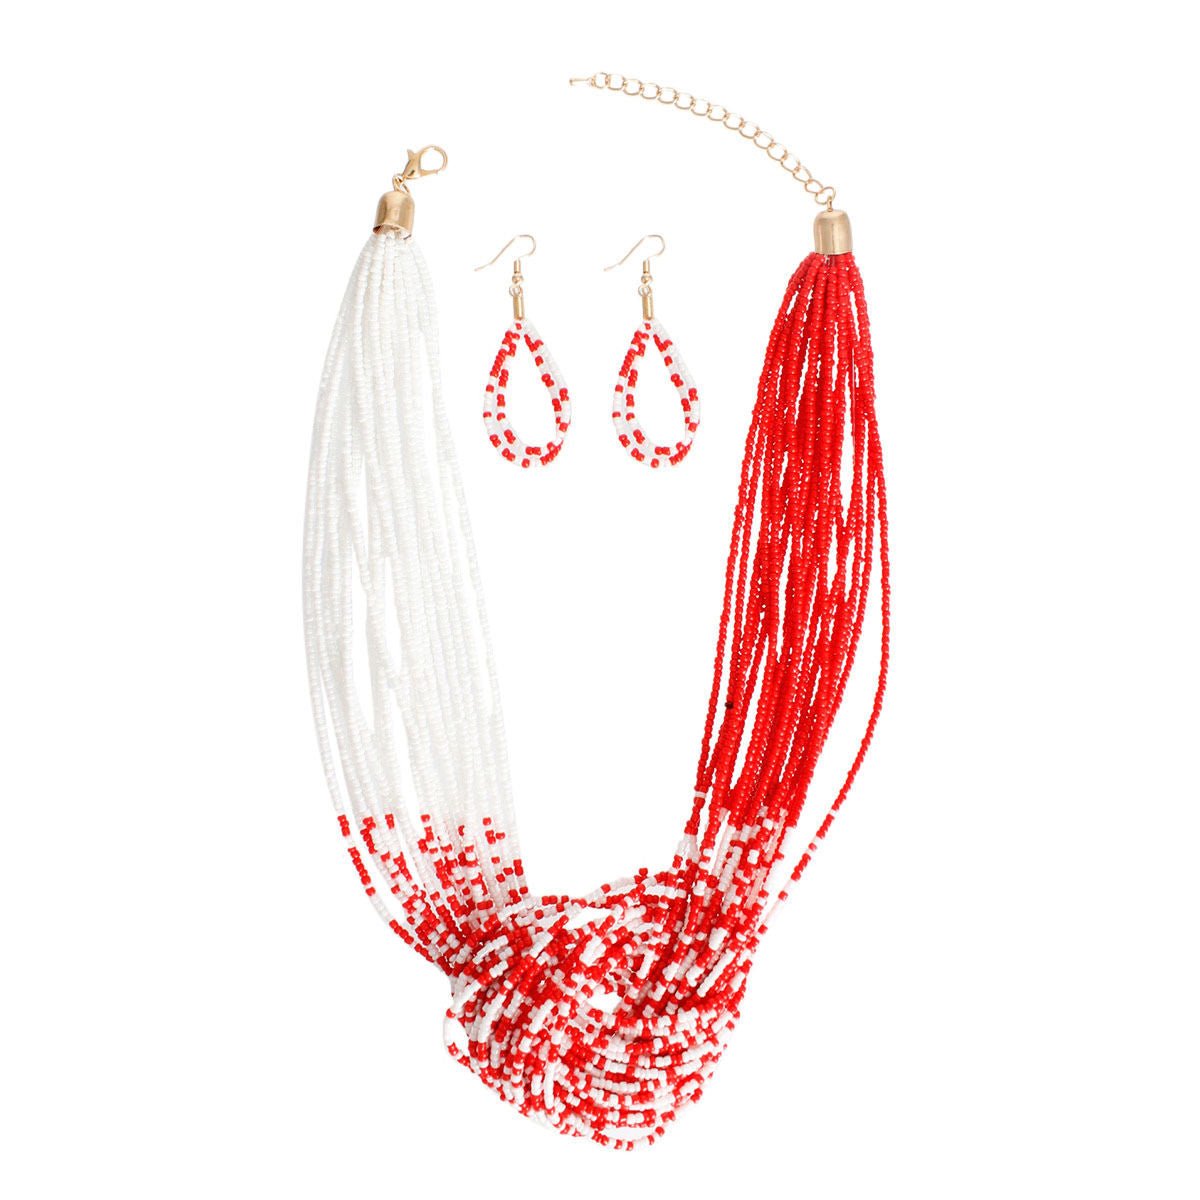 DST 20 Strand Red White Knot Set|18 + 2.5 inches